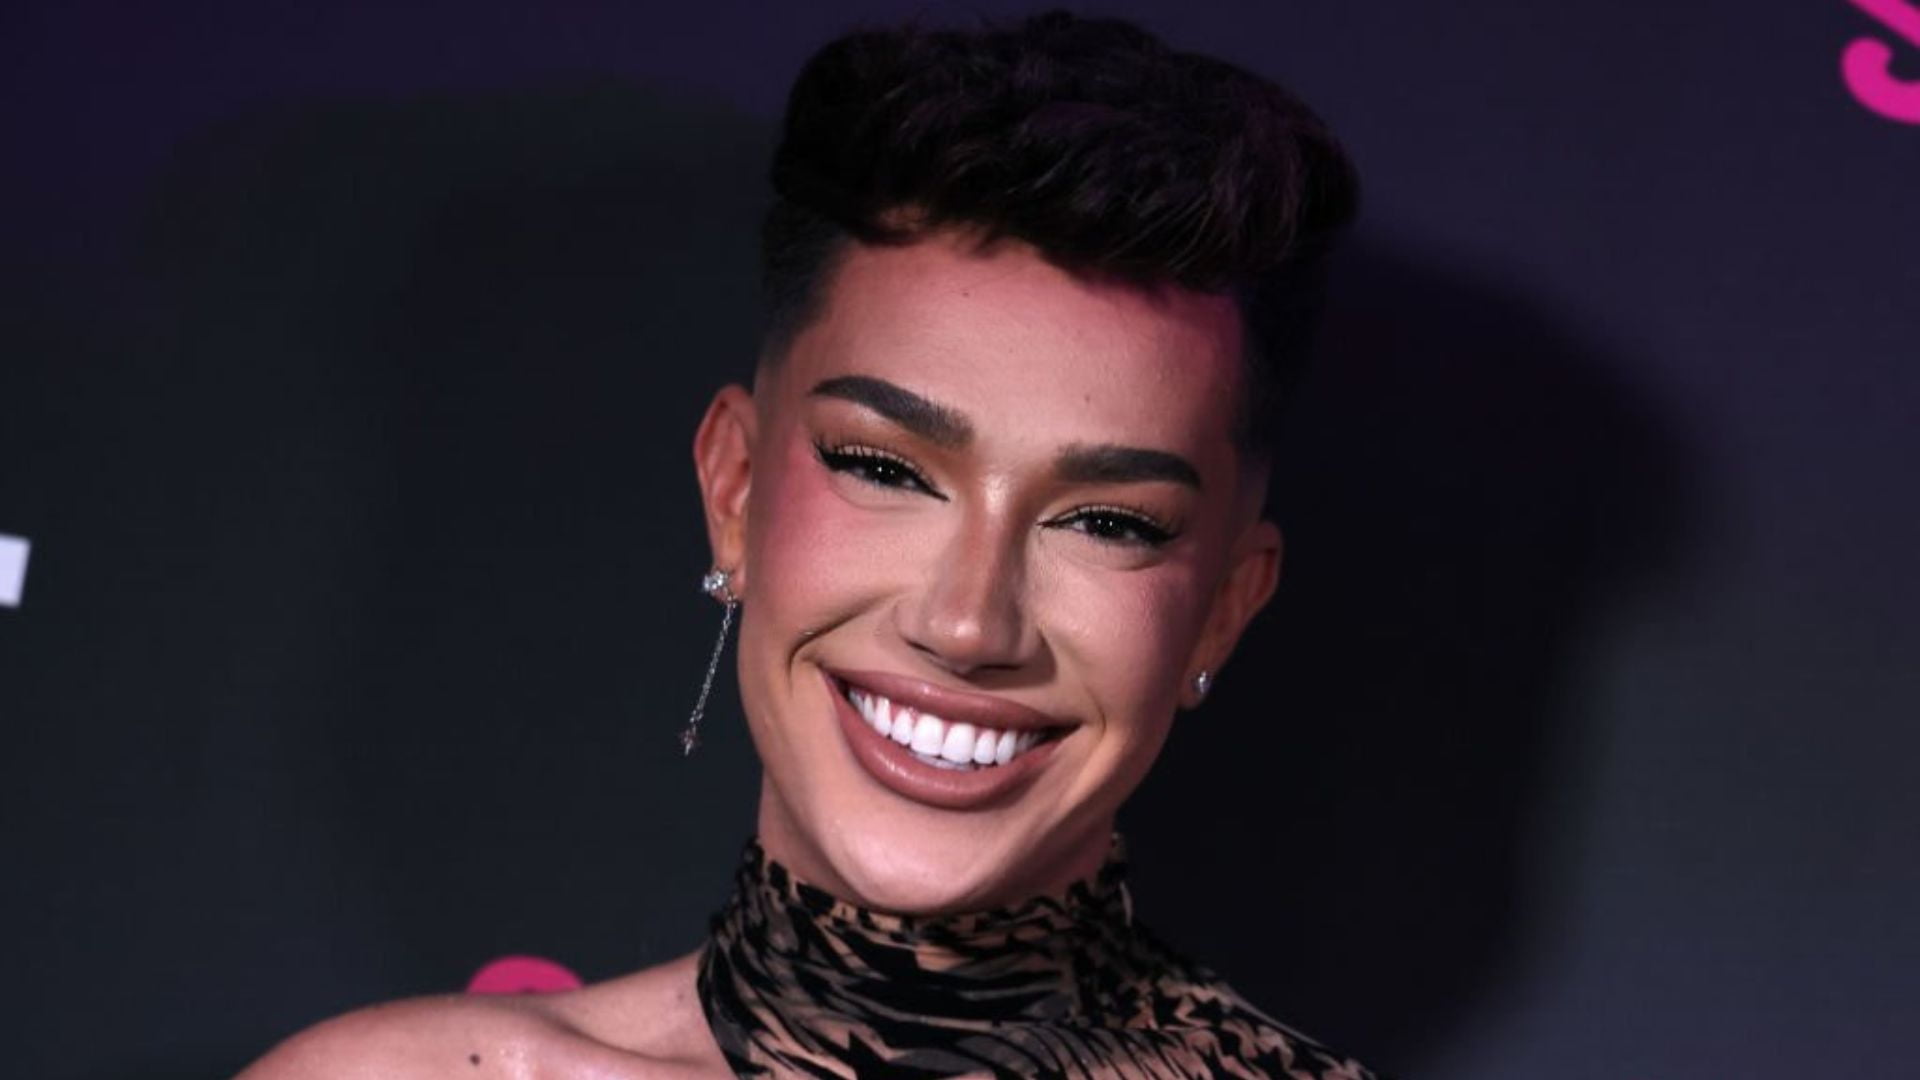 James Charles Plastic Surgery: Botox, Lip Fillers, And More!